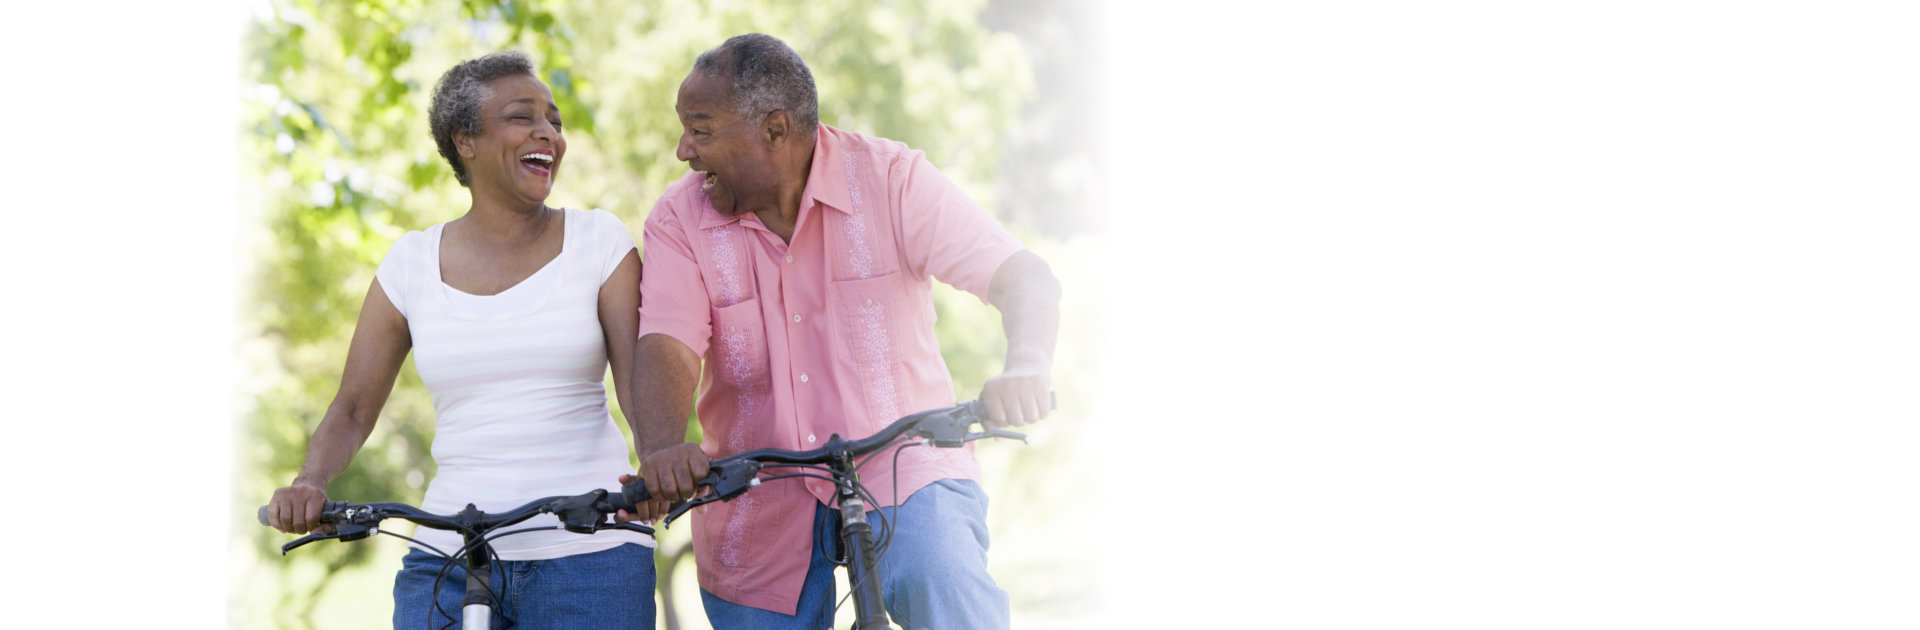 happy seniors riding a bicycle